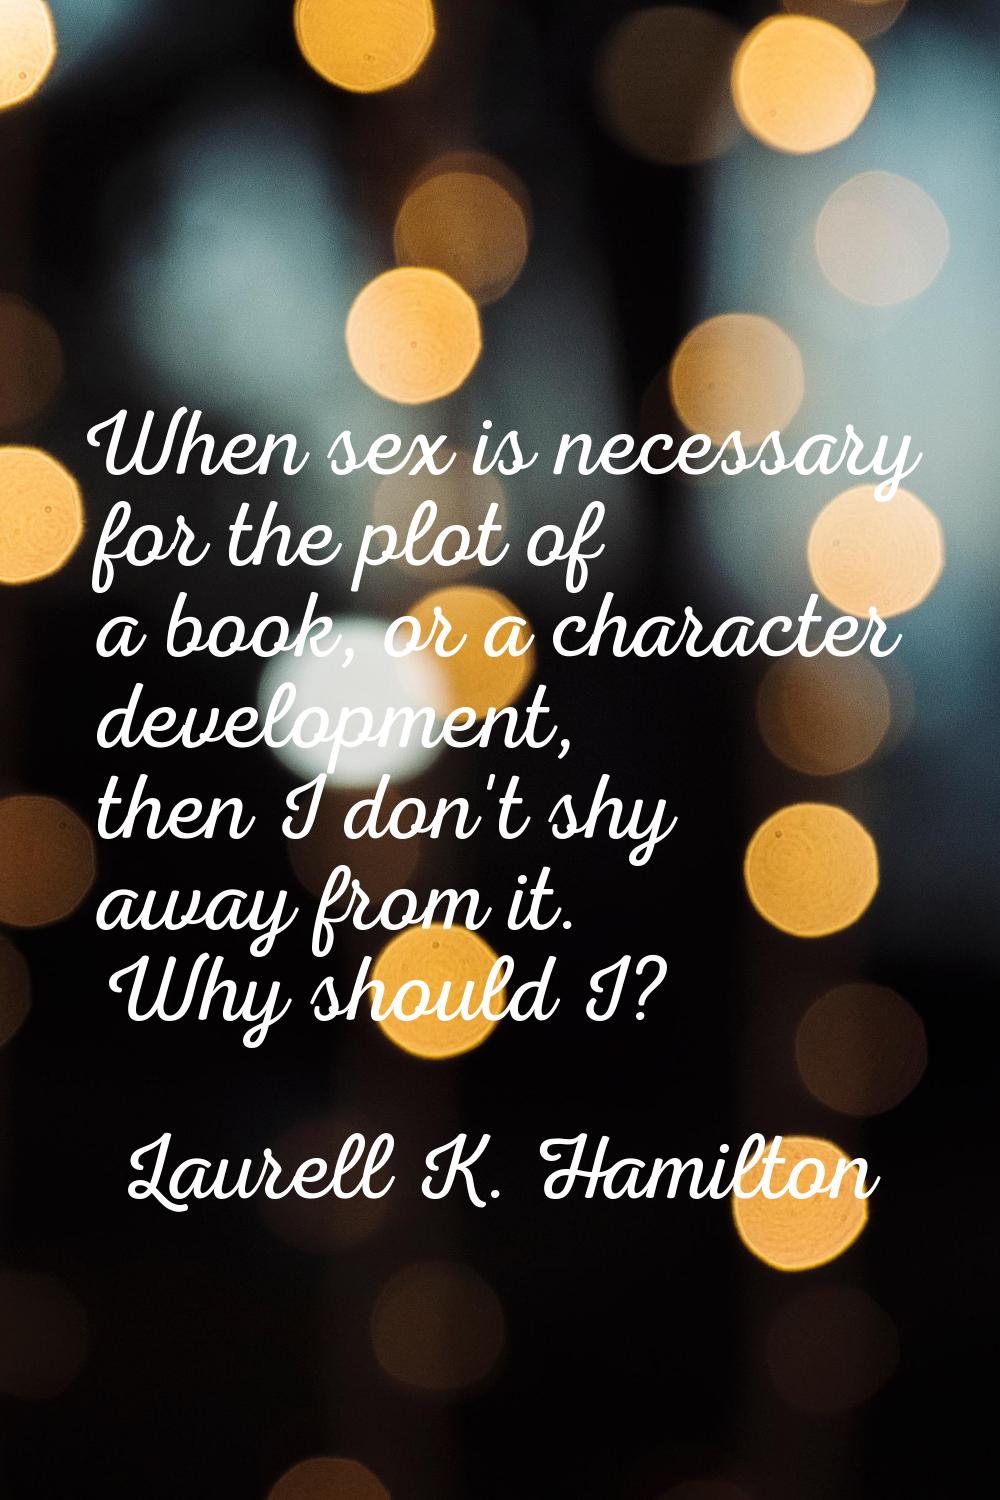 When sex is necessary for the plot of a book, or a character development, then I don't shy away fro